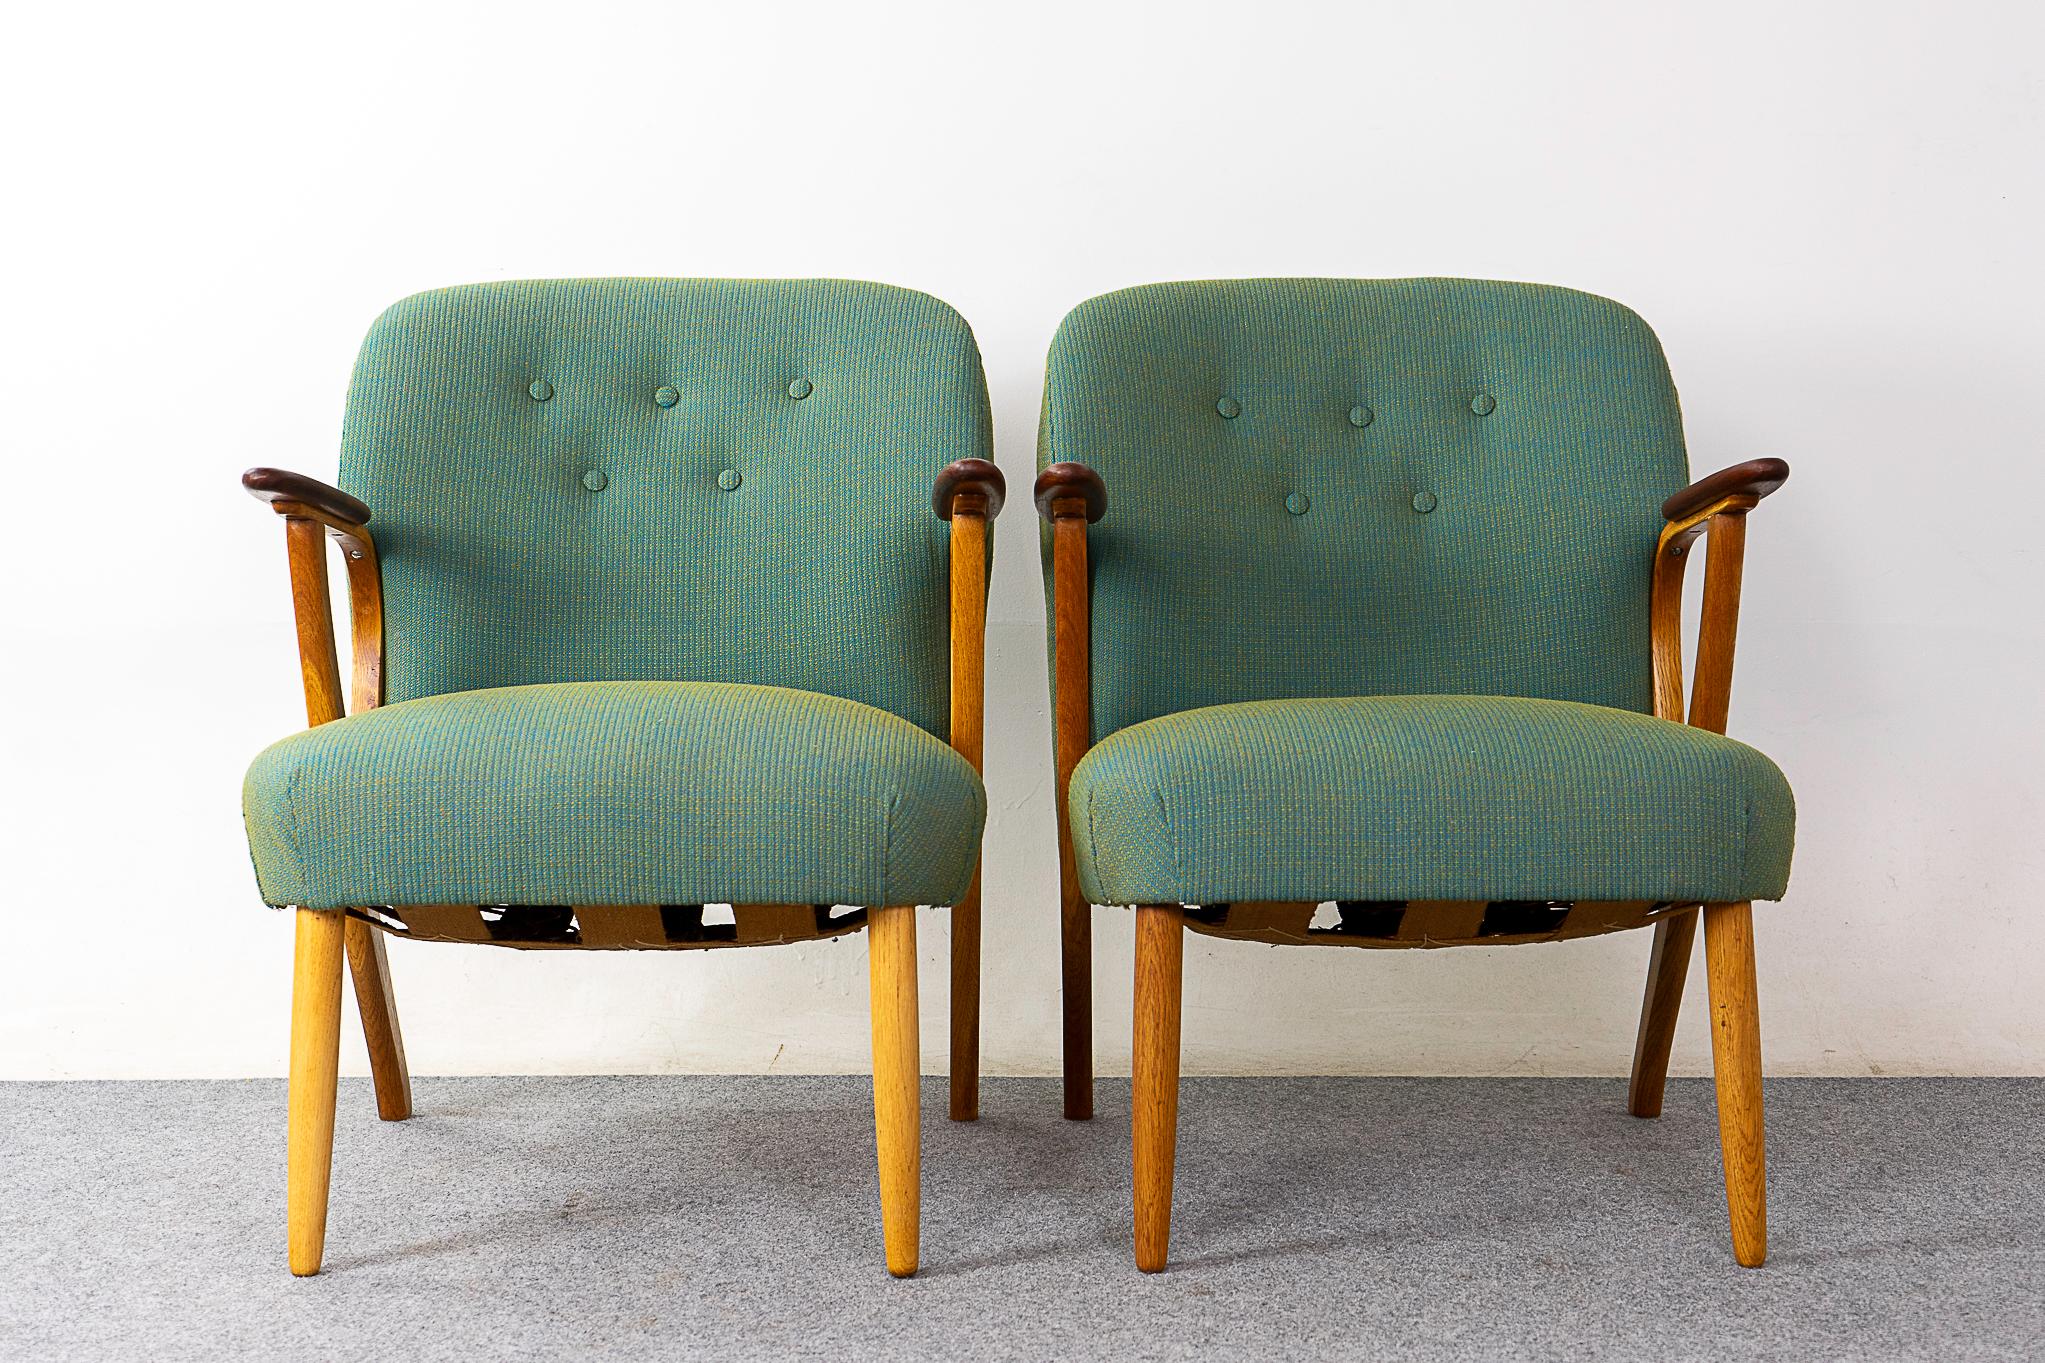 Oak & teak scandinavian lounge chairs, circa 1950's. Curvaceous bent oak frames with splayed legs and contrasting teak armrests. New wool upholstery with button tufted backrests. A very comfortable sit! 

Please inquire for remote and international